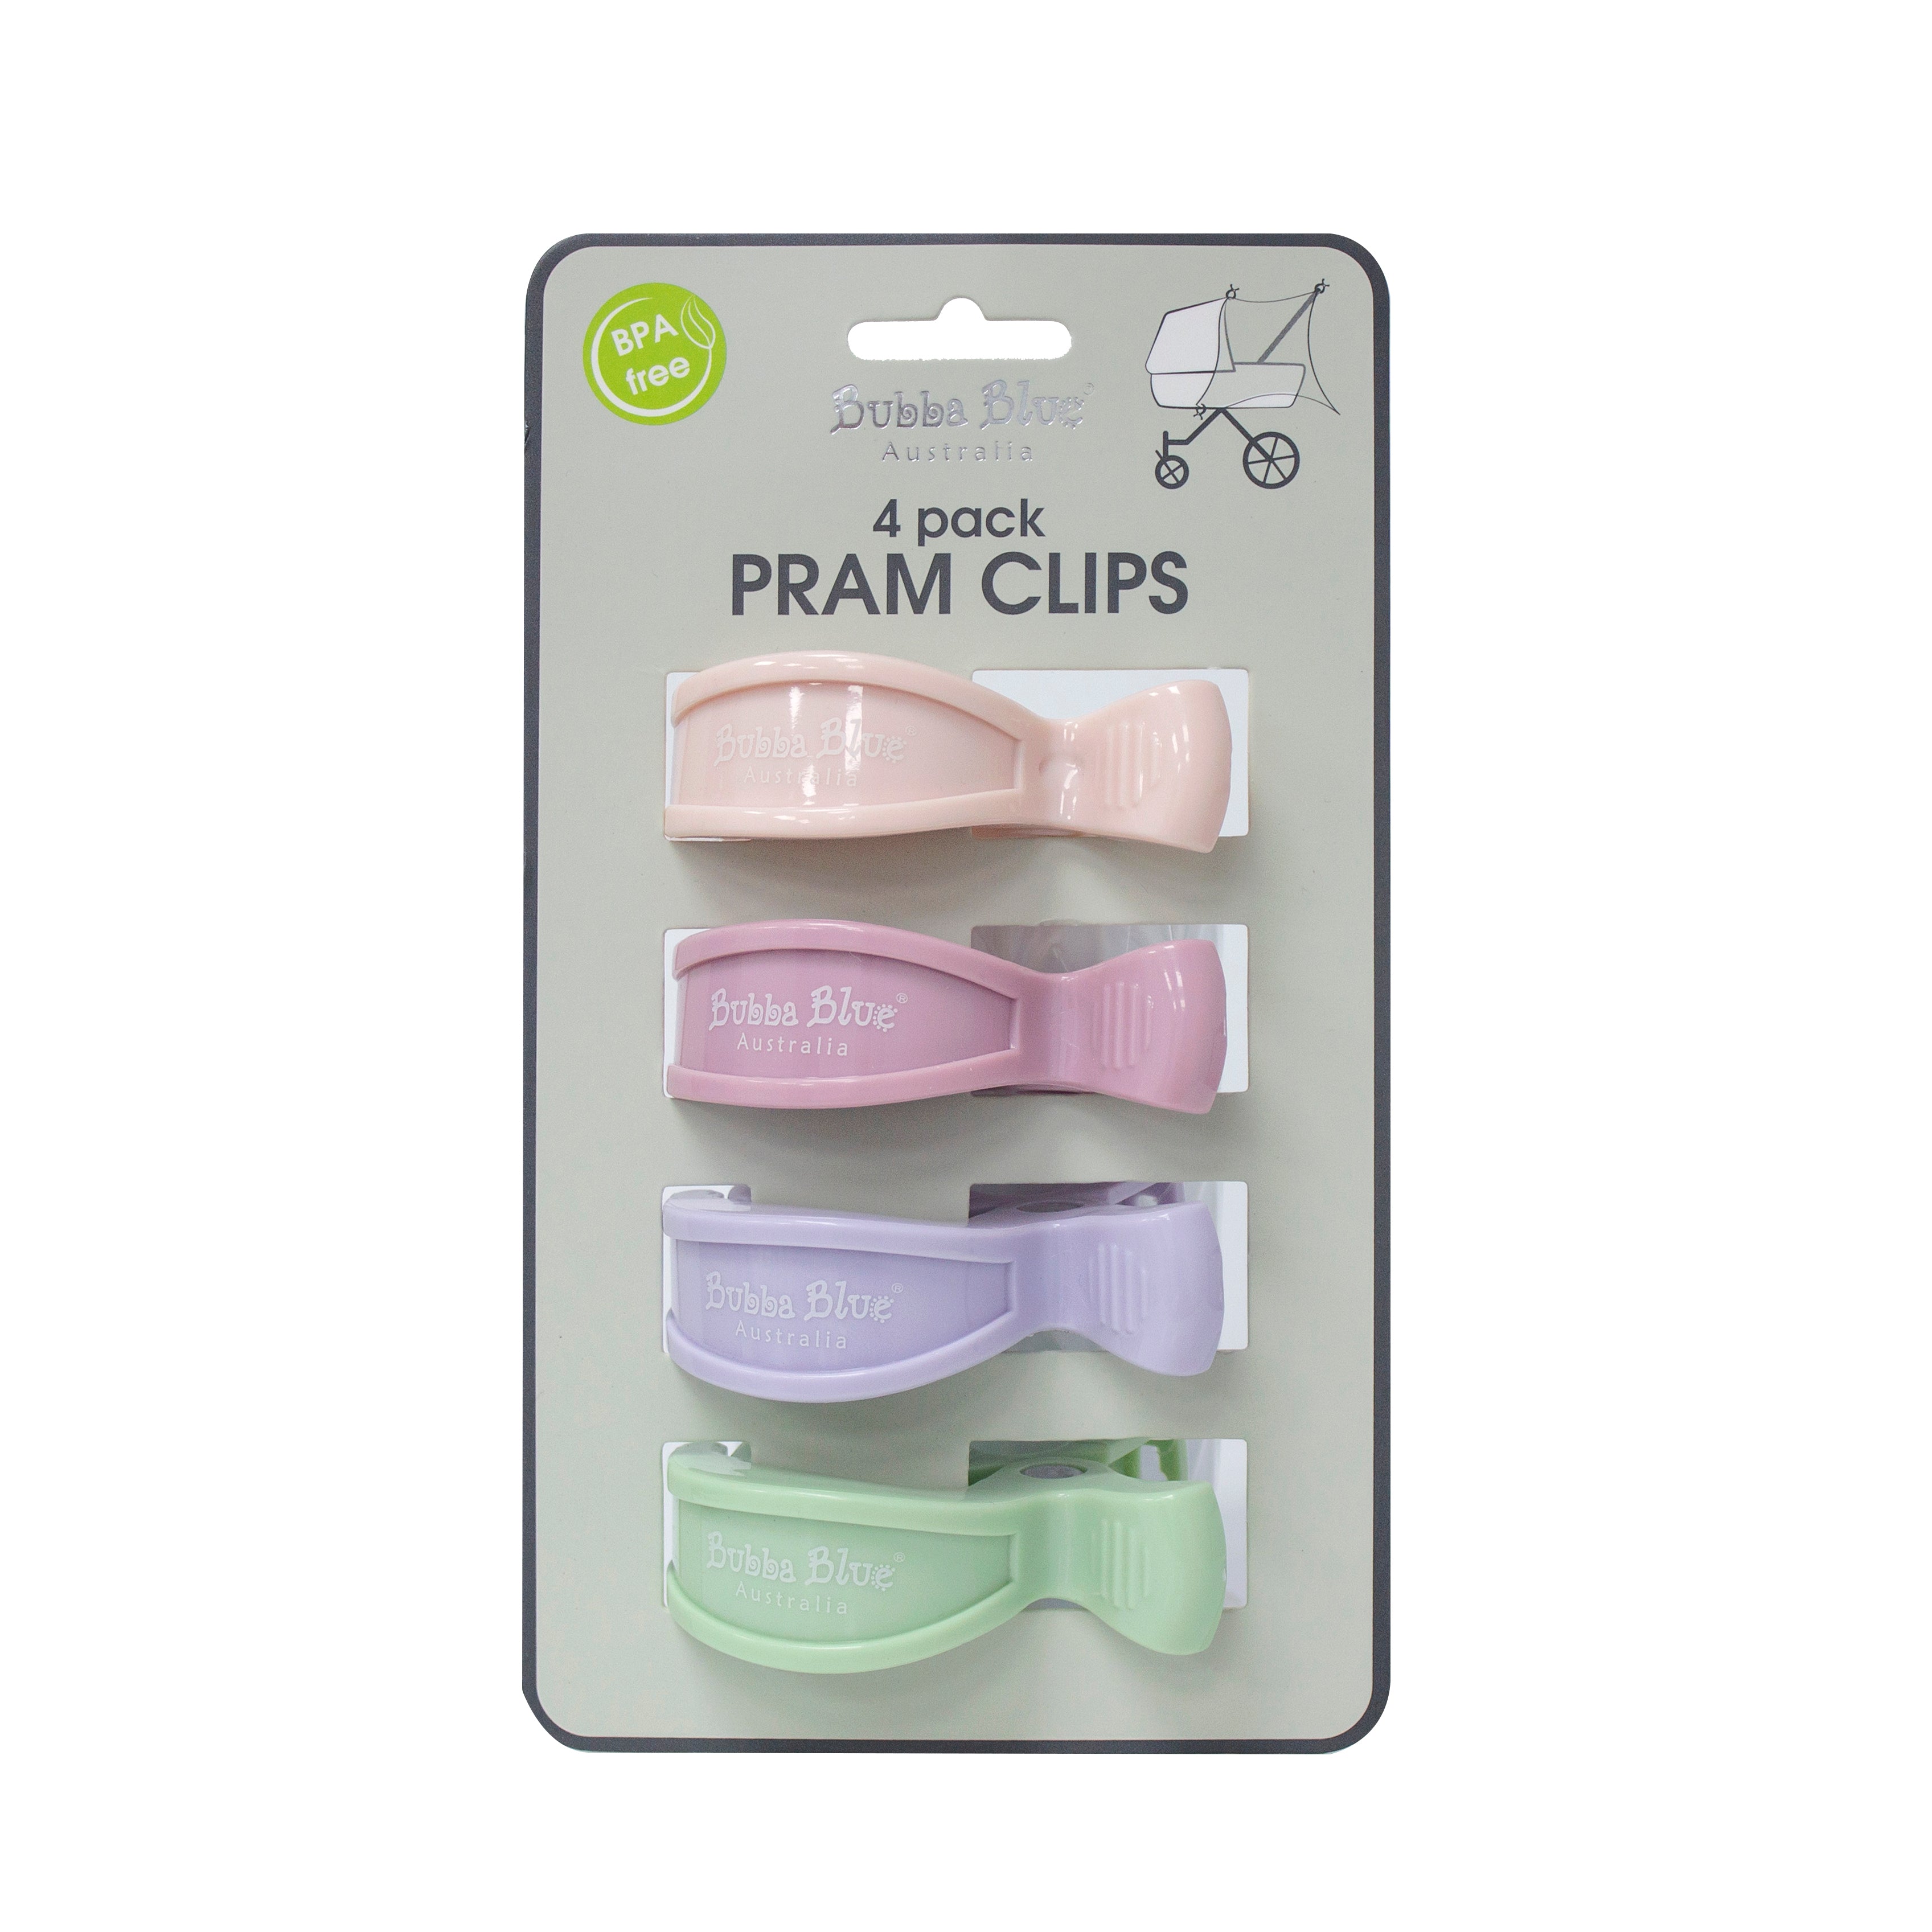 4pk Pram Clips Girl Pack - Dusty Berry/Salmon/Lilac/Olive